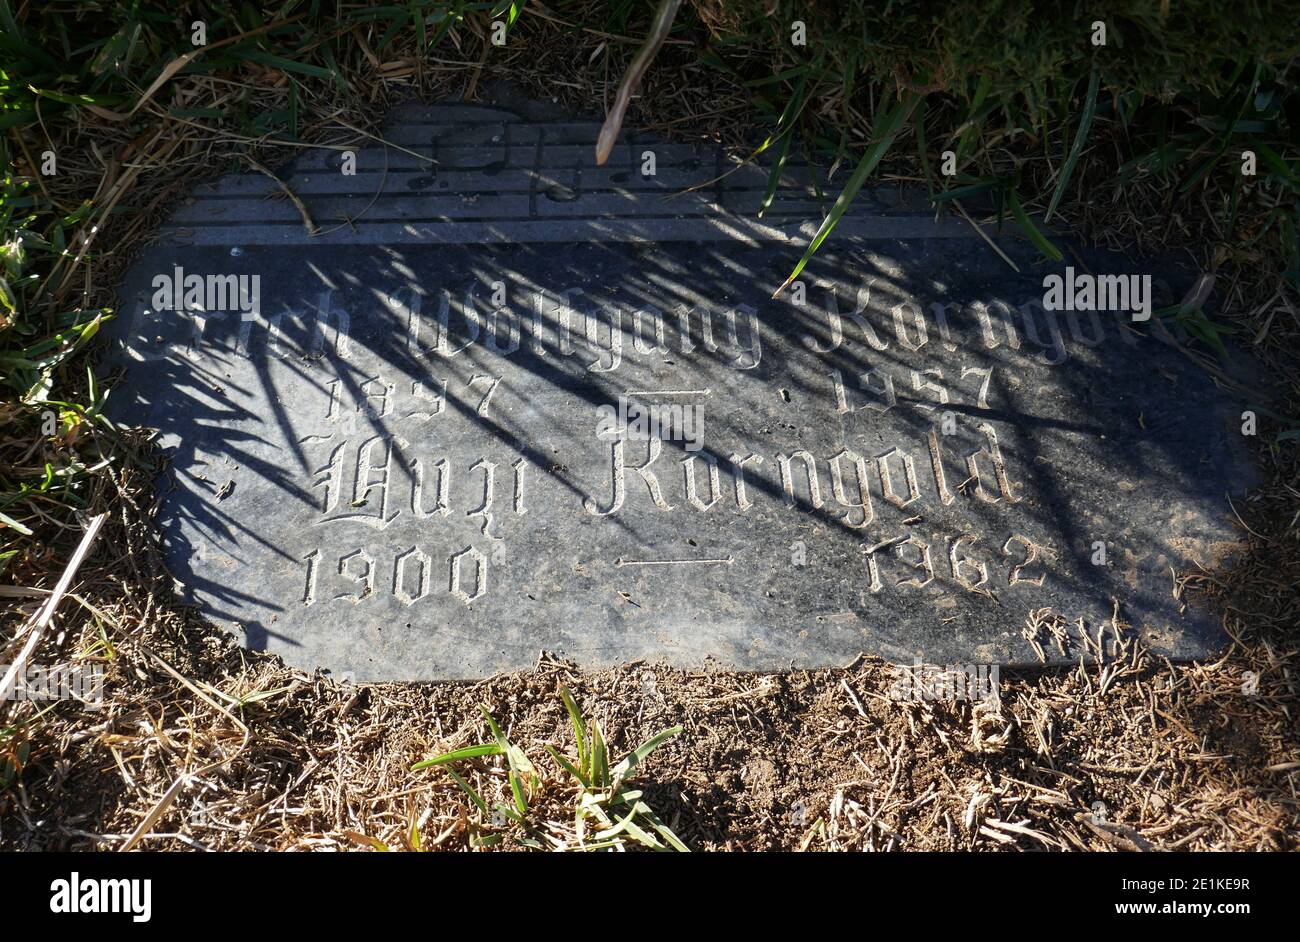 Los Angeles, California, USA 30th December 2020 A general view of atmosphere of composer Erich Wolfgang Korngold's grave at Hollywood Forever Cemetery on December 30, 2020 in Los Angeles, California, USA. Photo by Barry King/Alamy Stock Photo Stock Photo